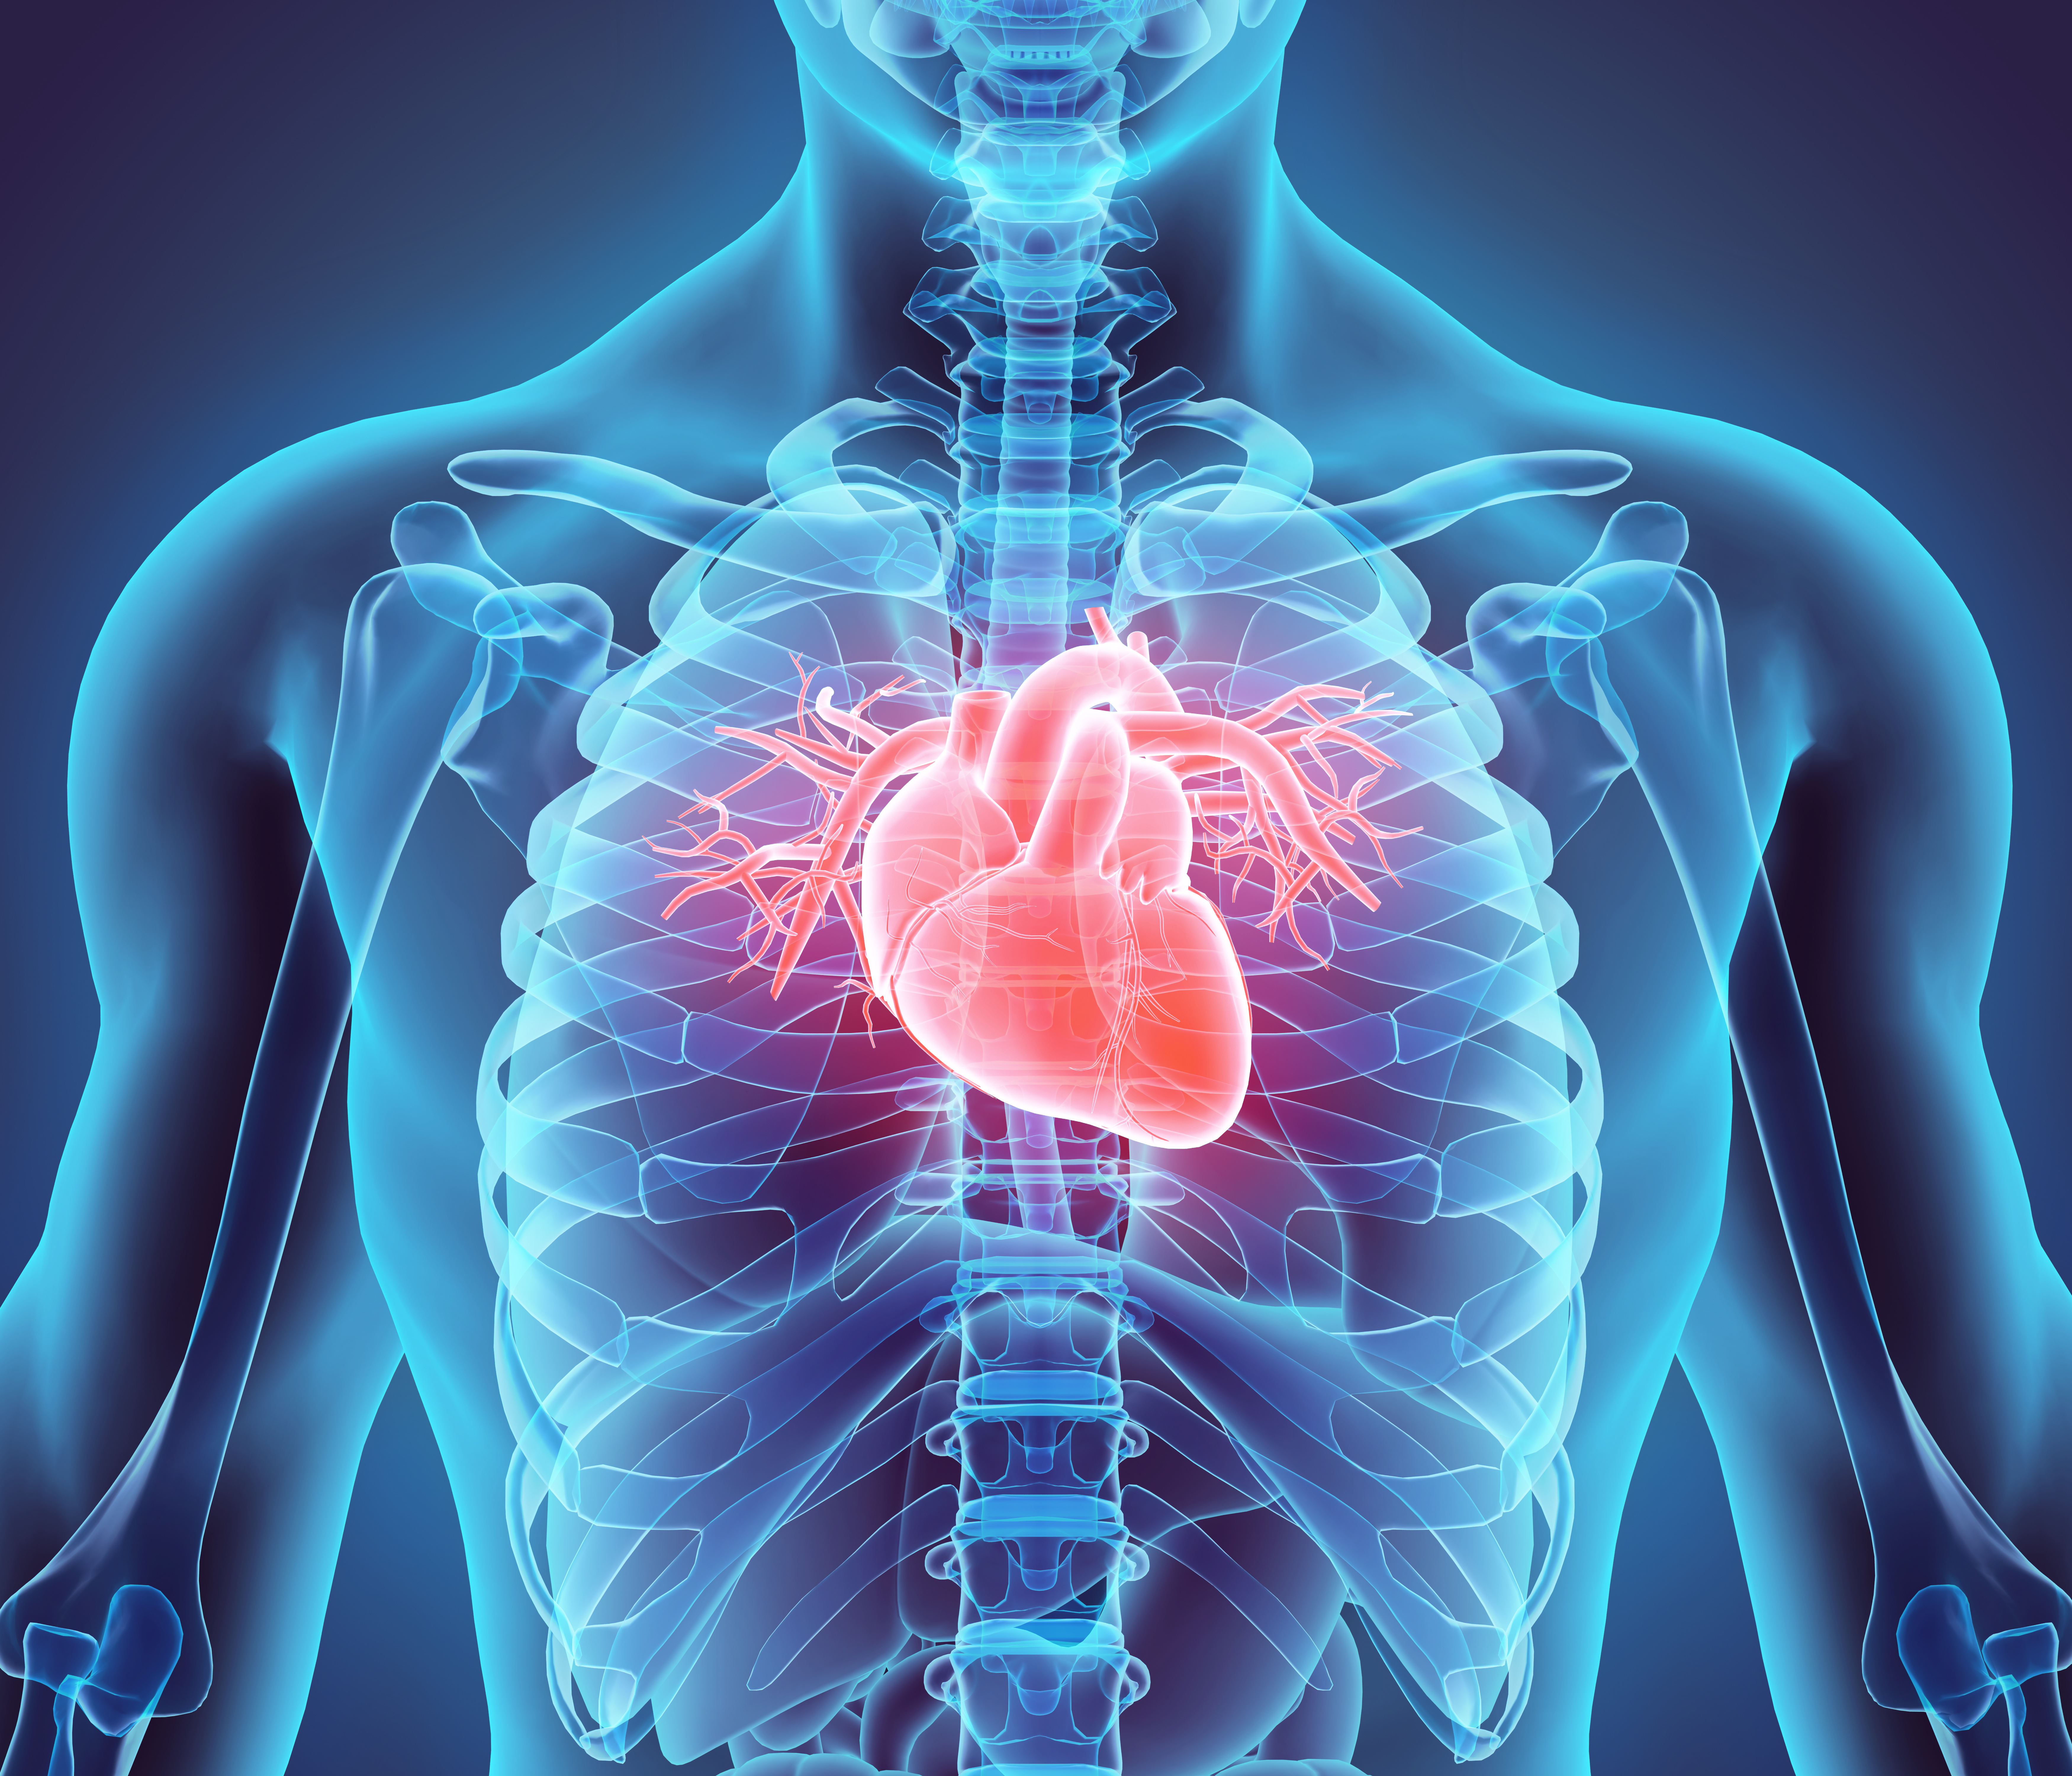 Beating Heart Patch is Large Enough to Repair the Human Heart – Wales